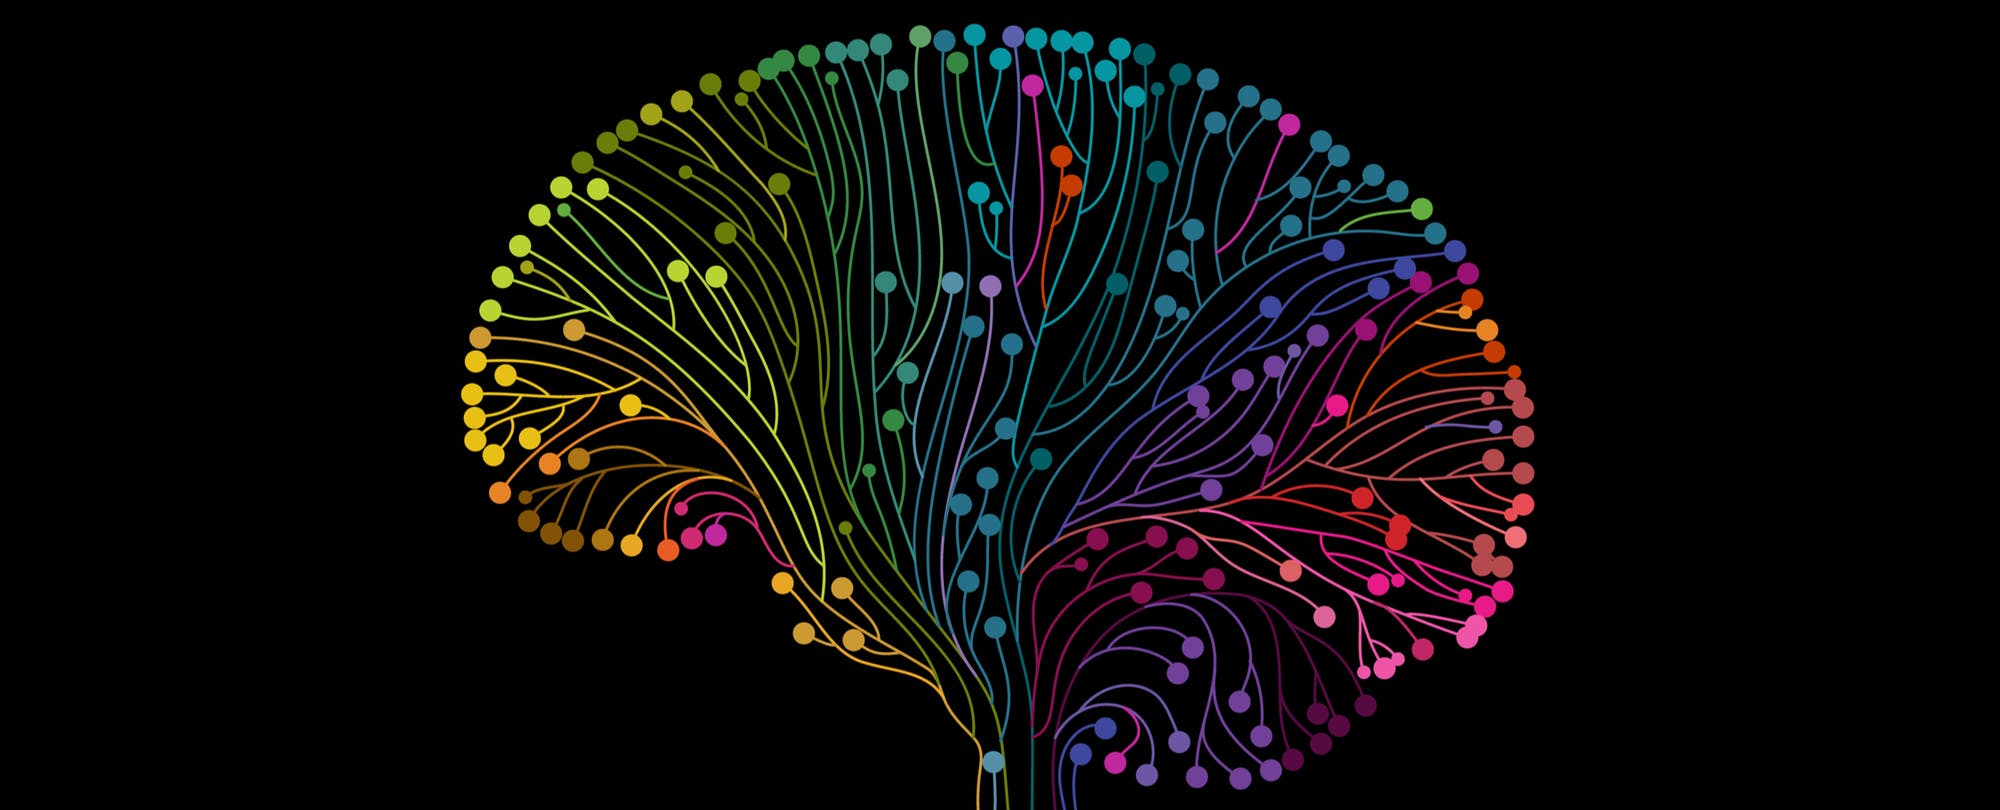 Tips to Increase Neuroplasticity